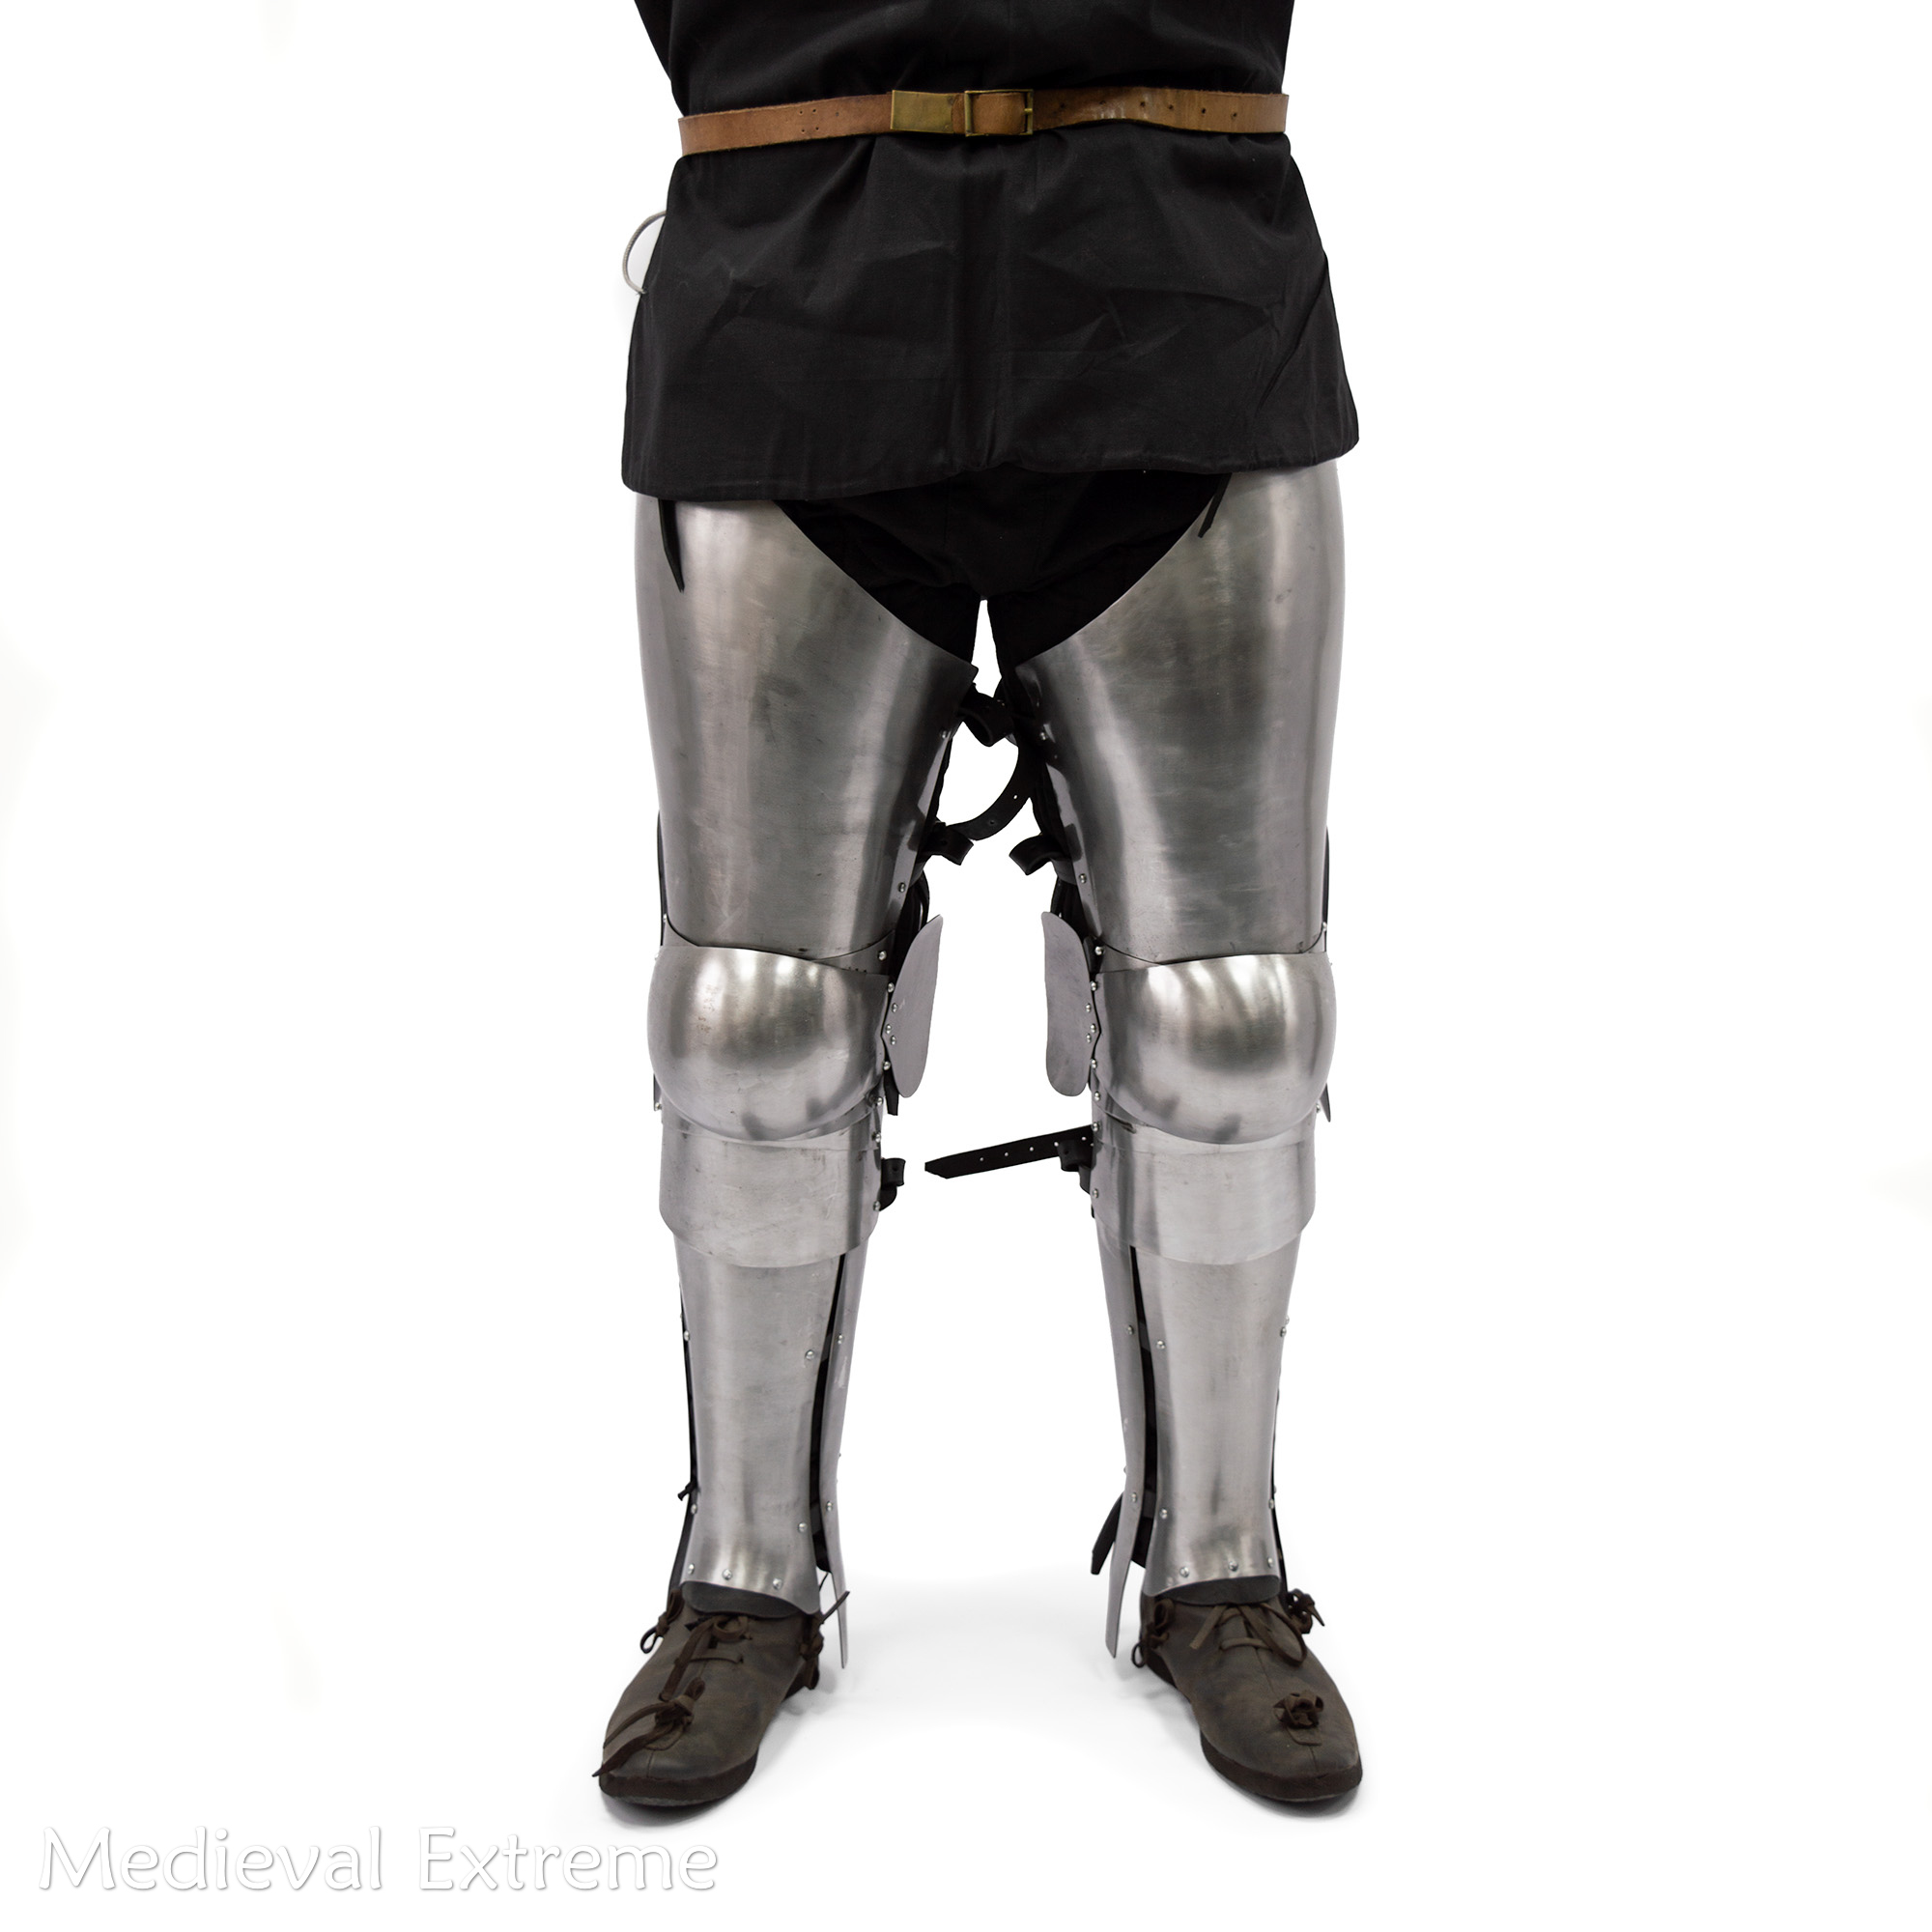 Anatomical full legs for armored combat front